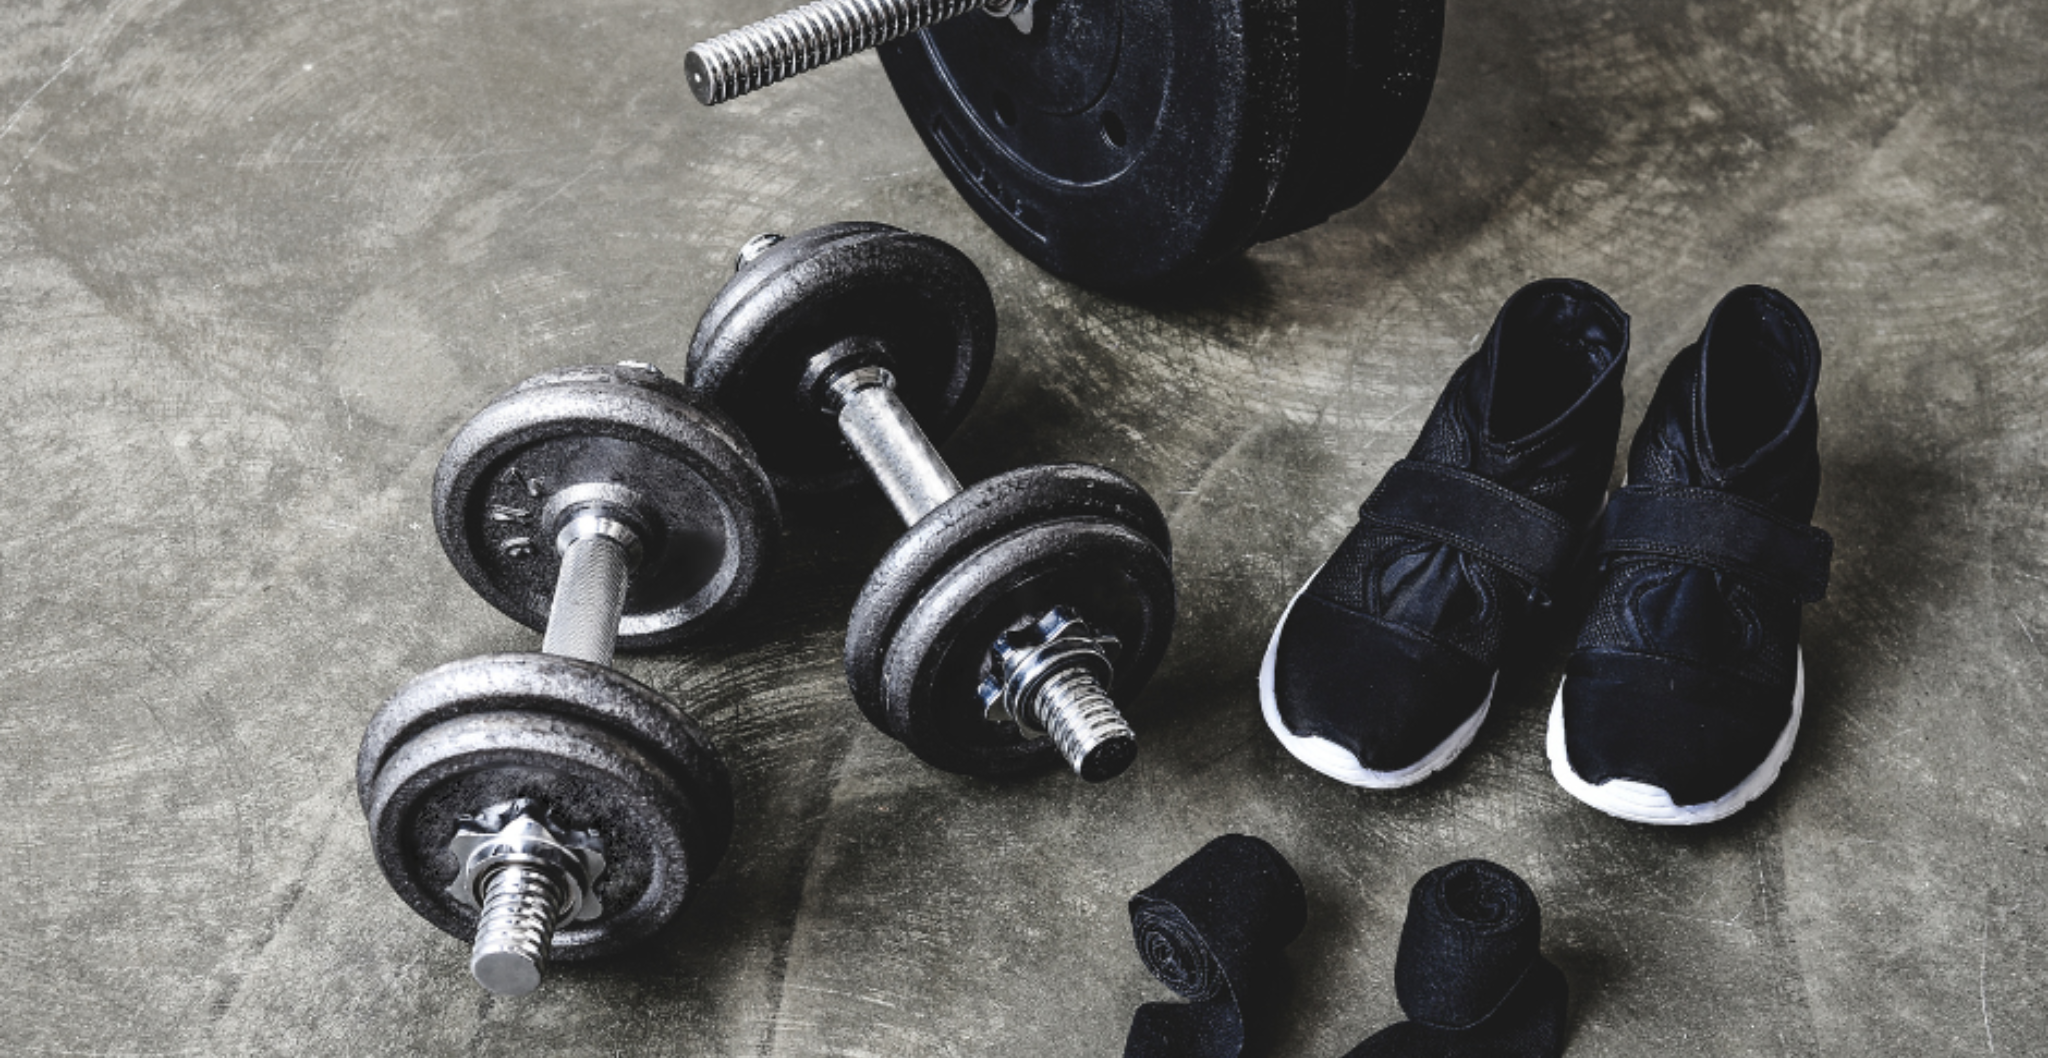 Sanitizing Workout Equipment, Wrestling, Or Gymnastic Mats – Everything You Need to Know